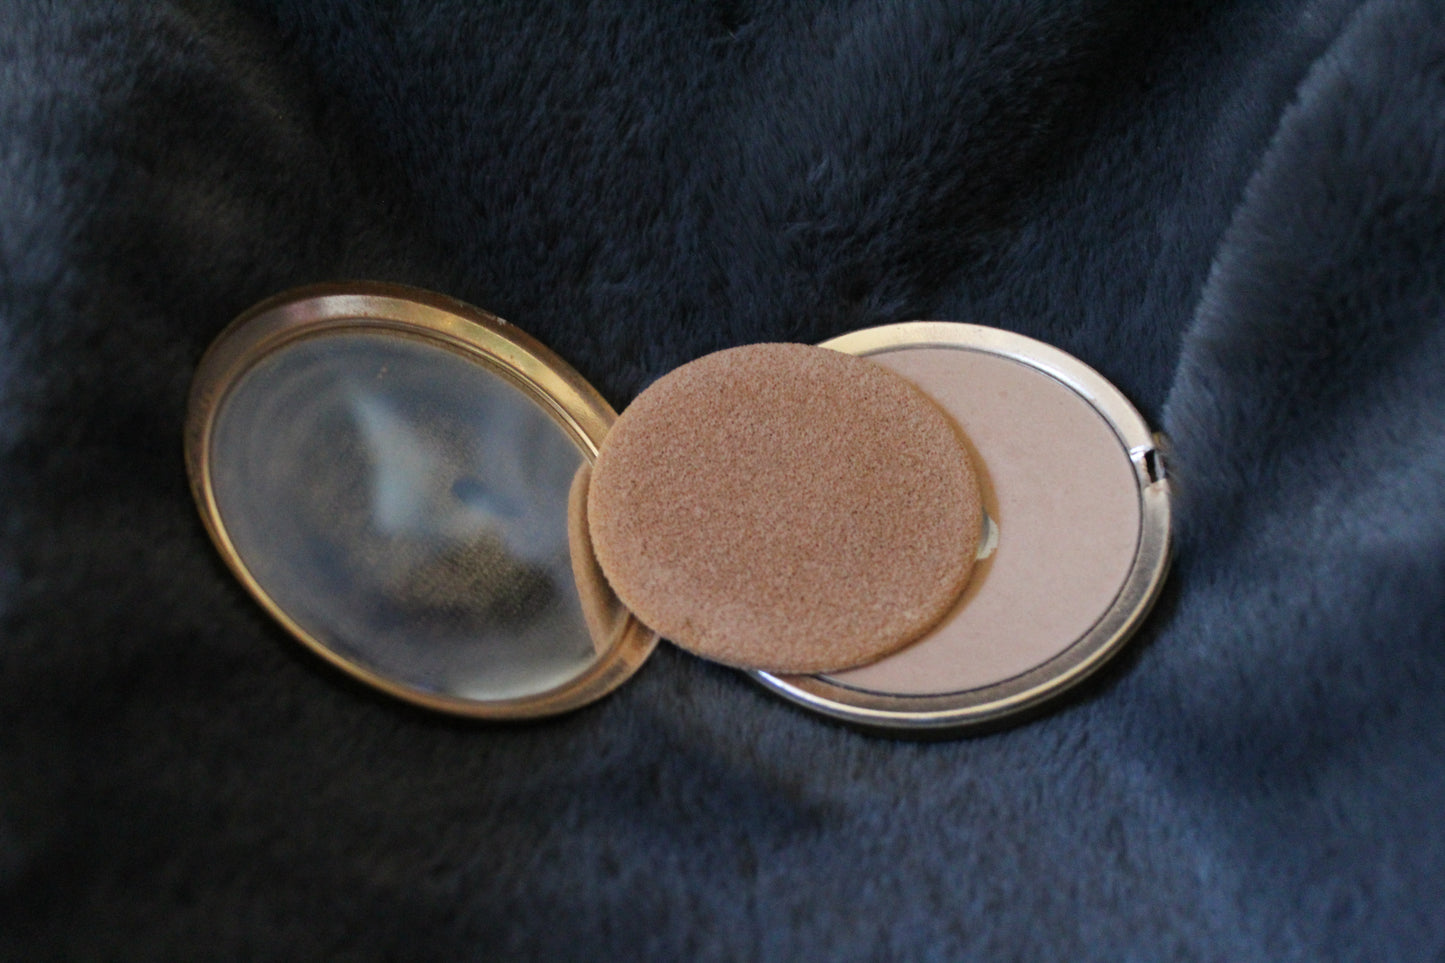 Round gold compact with floral details